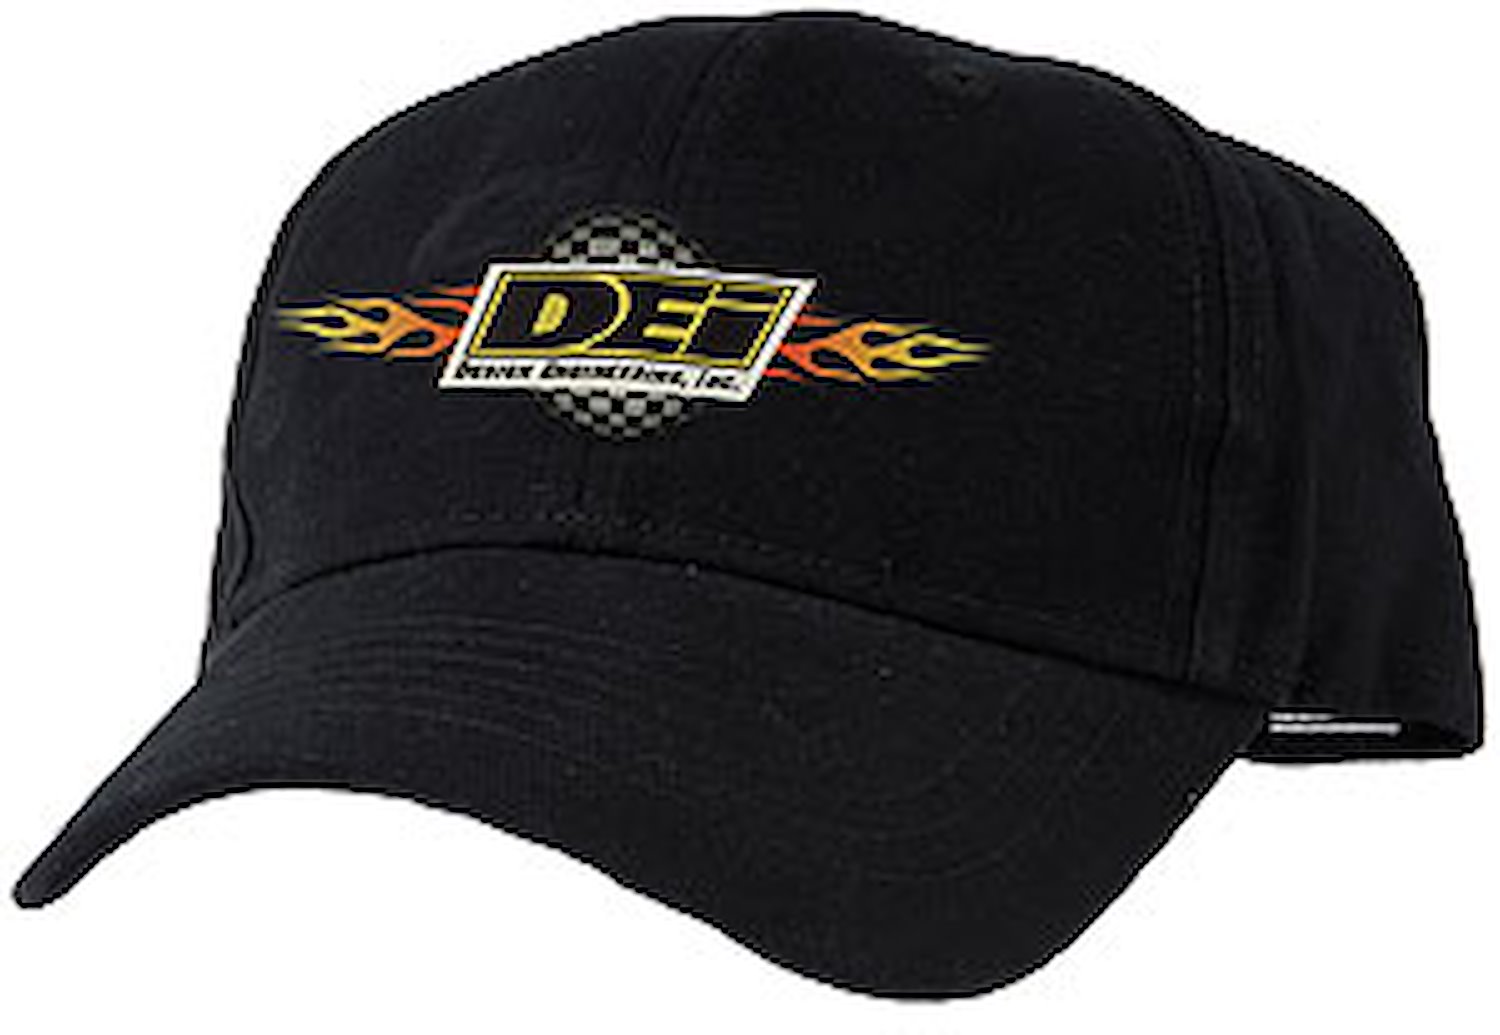 Embroidered Cap One size fits all